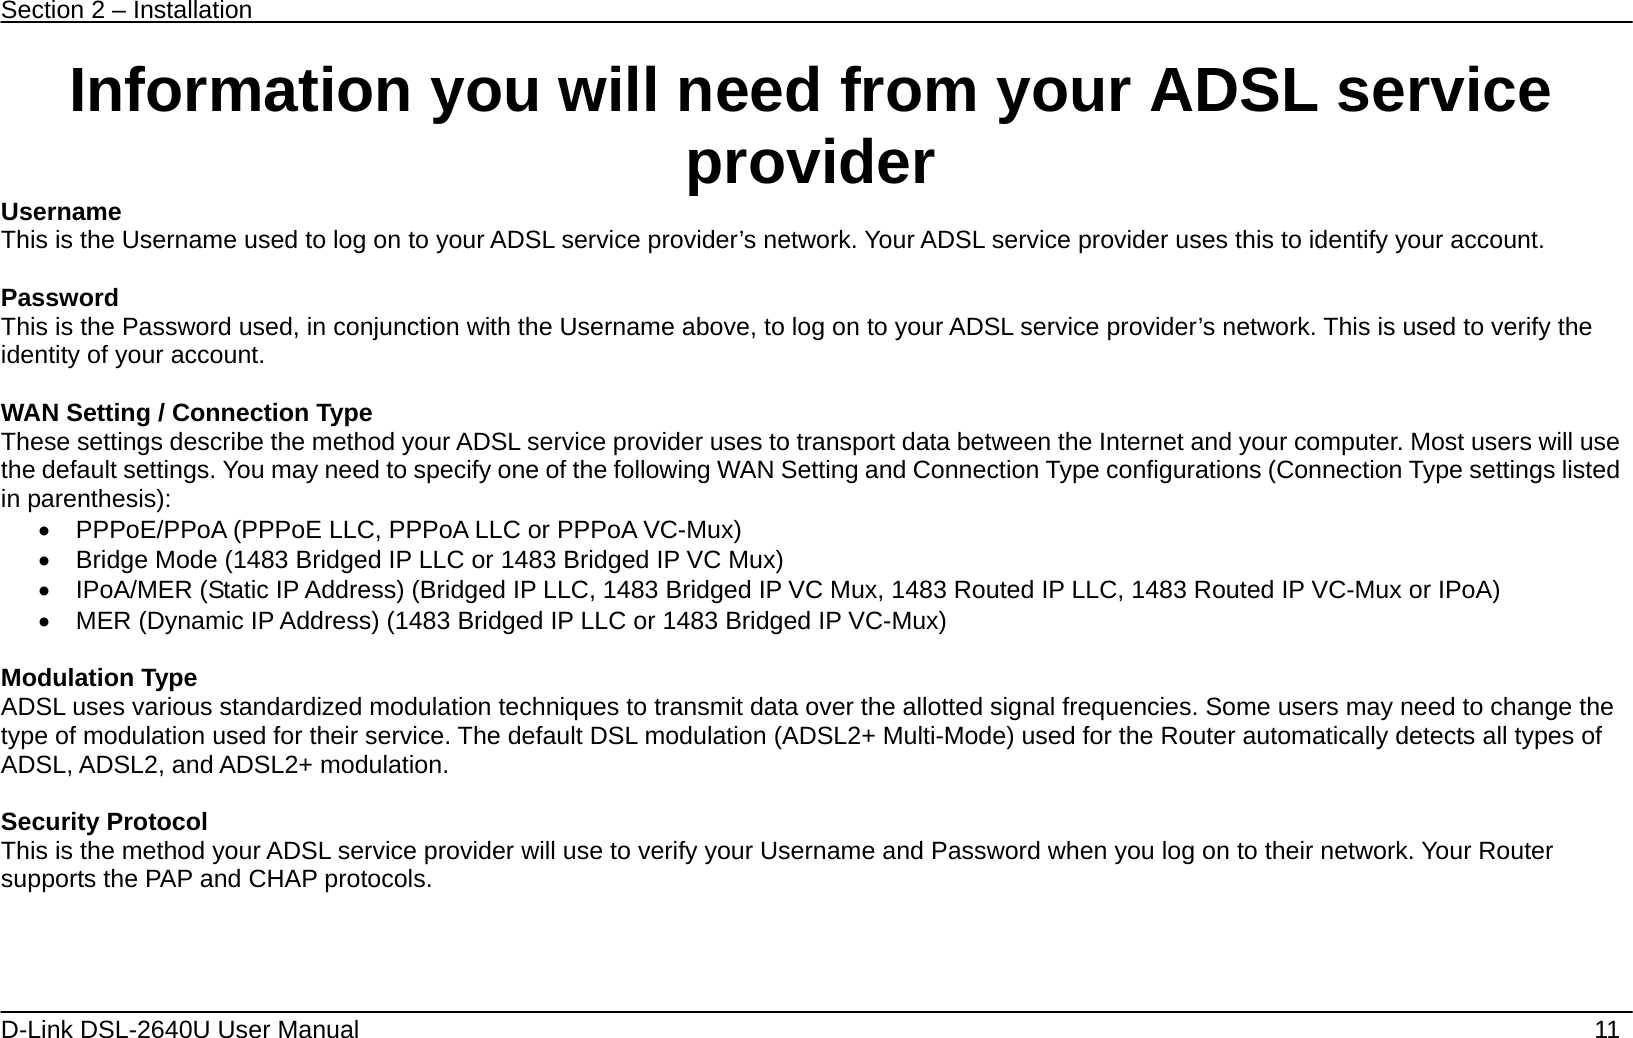 Section 2 – Installation   D-Link DSL-2640U User Manual    11 Information you will need from your ADSL service provider Username This is the Username used to log on to your ADSL service provider’s network. Your ADSL service provider uses this to identify your account.  Password This is the Password used, in conjunction with the Username above, to log on to your ADSL service provider’s network. This is used to verify the identity of your account.  WAN Setting / Connection Type These settings describe the method your ADSL service provider uses to transport data between the Internet and your computer. Most users will use the default settings. You may need to specify one of the following WAN Setting and Connection Type configurations (Connection Type settings listed in parenthesis):   •  PPPoE/PPoA (PPPoE LLC, PPPoA LLC or PPPoA VC-Mux) •  Bridge Mode (1483 Bridged IP LLC or 1483 Bridged IP VC Mux) •  IPoA/MER (Static IP Address) (Bridged IP LLC, 1483 Bridged IP VC Mux, 1483 Routed IP LLC, 1483 Routed IP VC-Mux or IPoA) •  MER (Dynamic IP Address) (1483 Bridged IP LLC or 1483 Bridged IP VC-Mux)      Modulation Type ADSL uses various standardized modulation techniques to transmit data over the allotted signal frequencies. Some users may need to change the type of modulation used for their service. The default DSL modulation (ADSL2+ Multi-Mode) used for the Router automatically detects all types of ADSL, ADSL2, and ADSL2+ modulation.  Security Protocol This is the method your ADSL service provider will use to verify your Username and Password when you log on to their network. Your Router supports the PAP and CHAP protocols.     